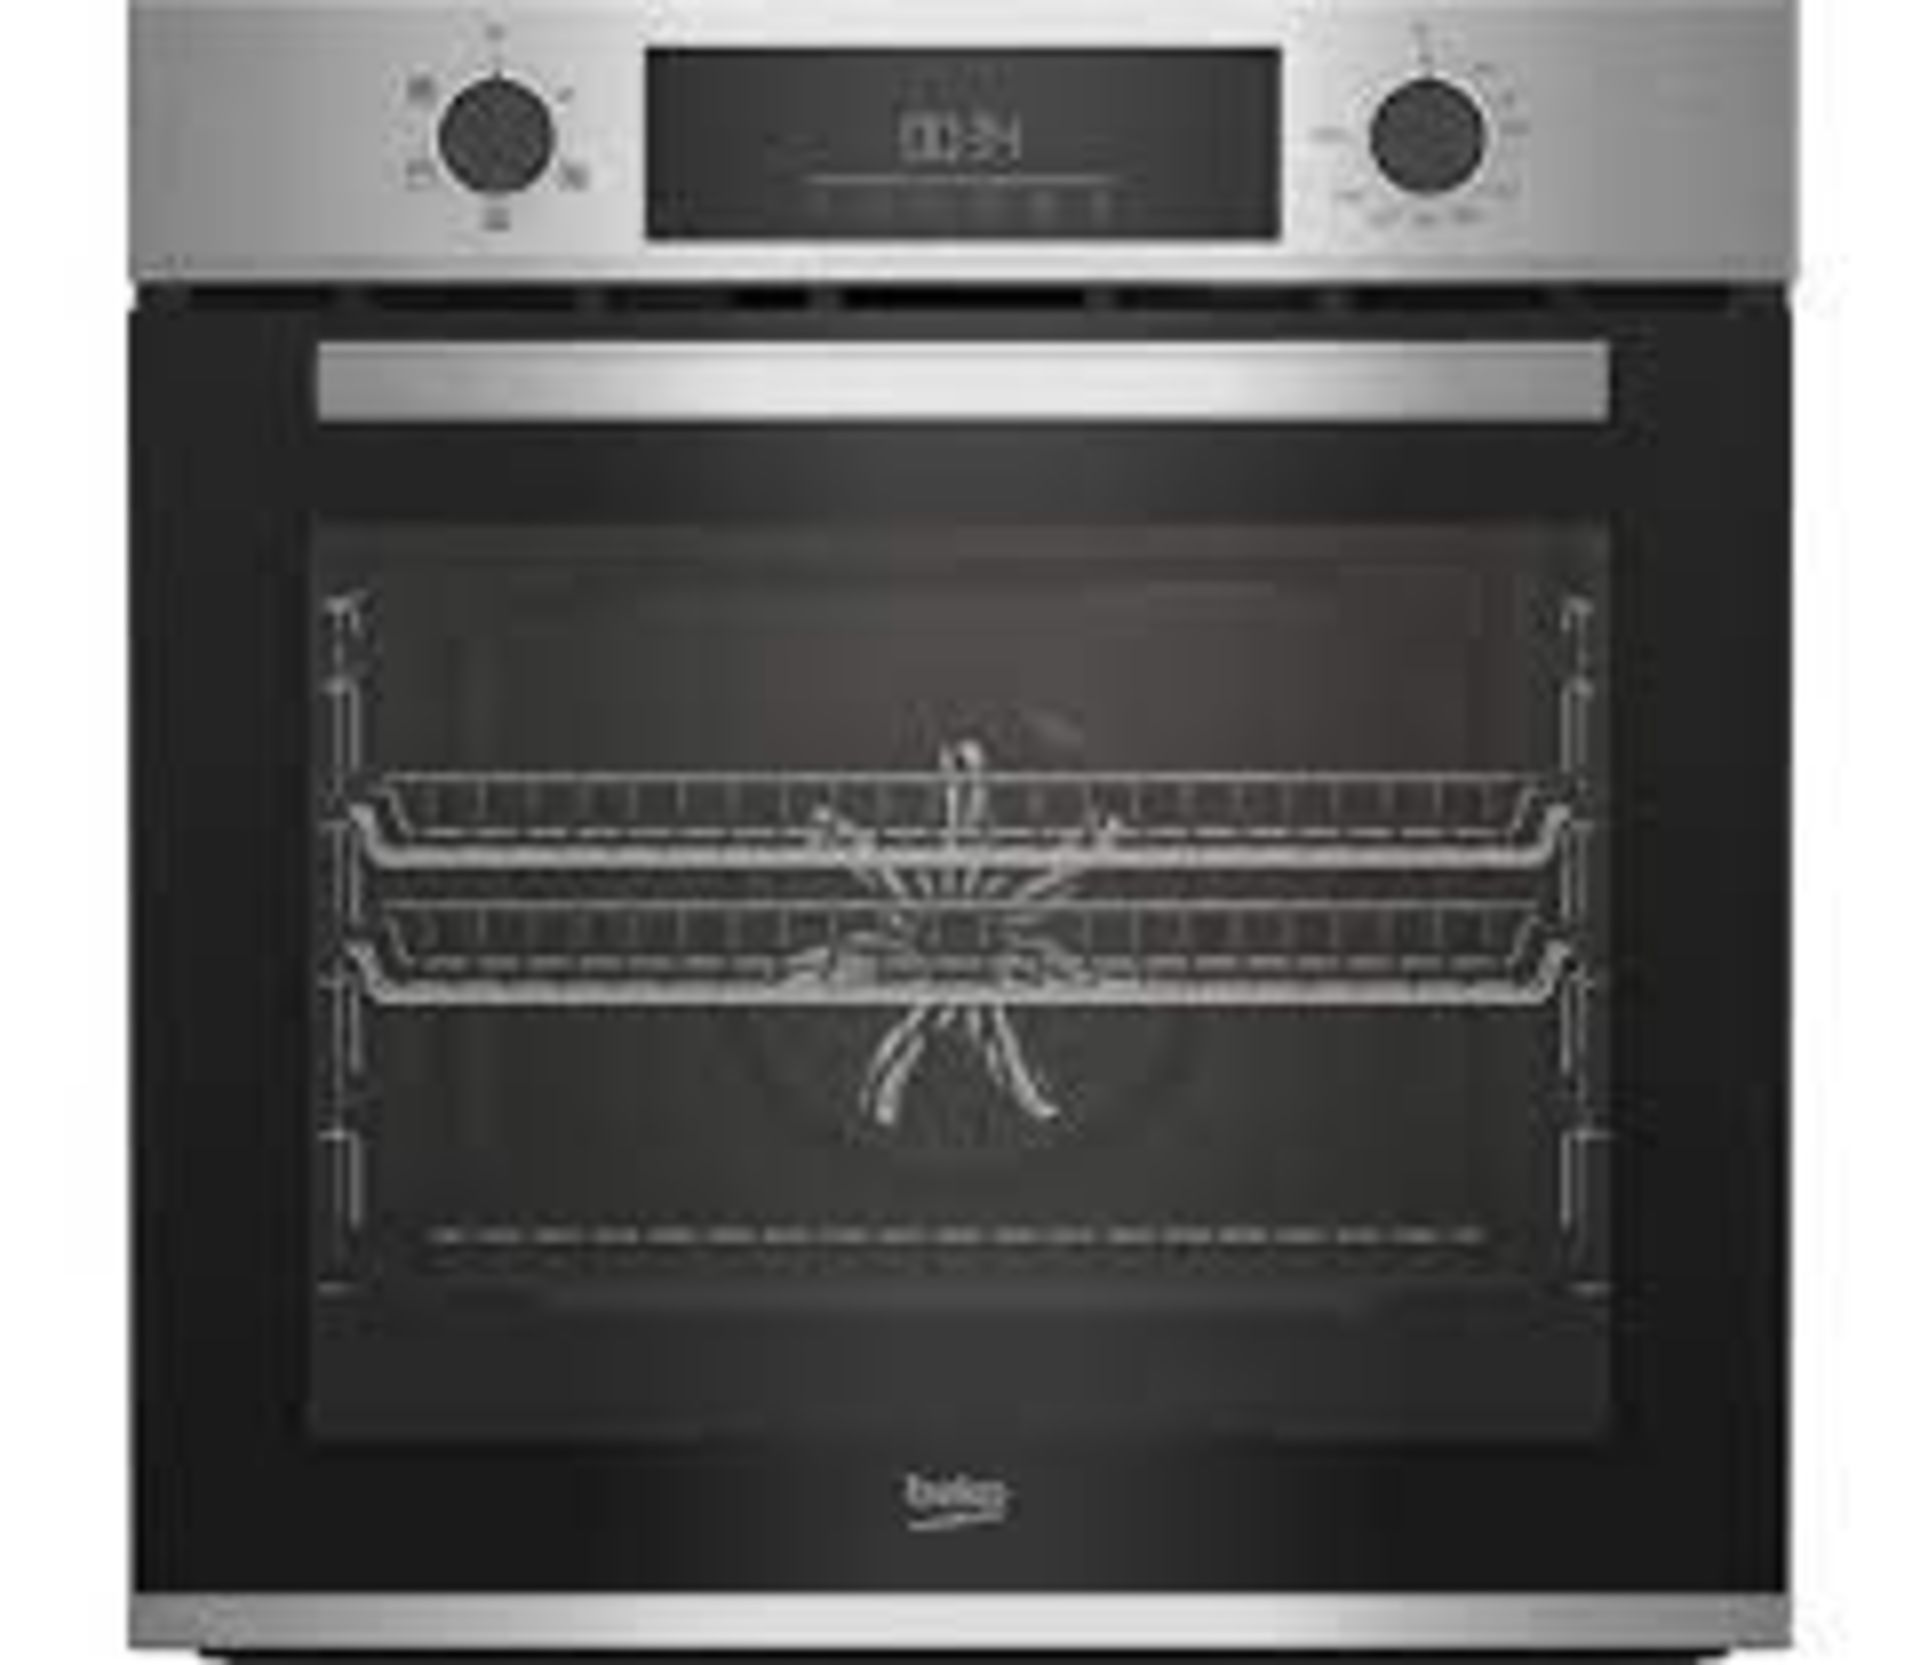 Beko 60cm Built-In Oven with AeroPerfect™. - ER47.